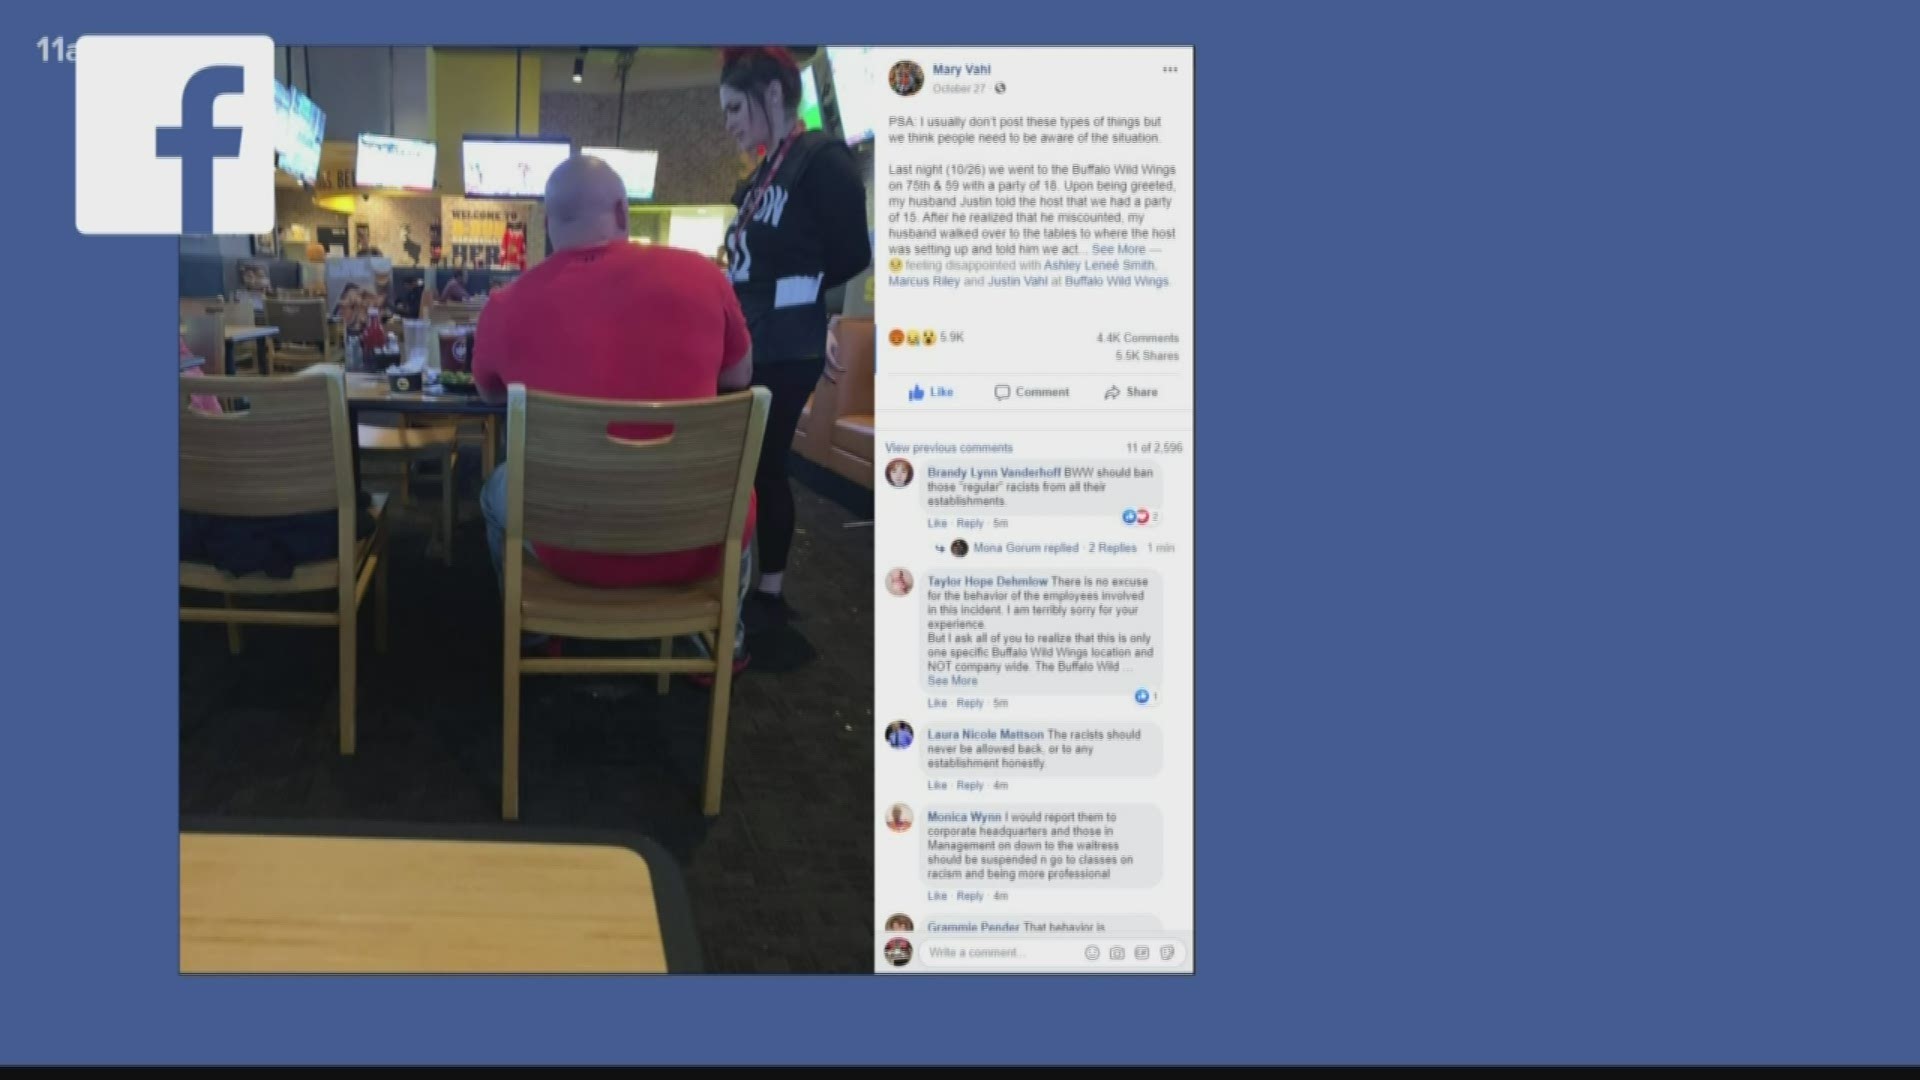 The alleged incident happened at a Buffalo Wild Wings in Naperville, Illinois. The woman's Facebook post has gone viral.